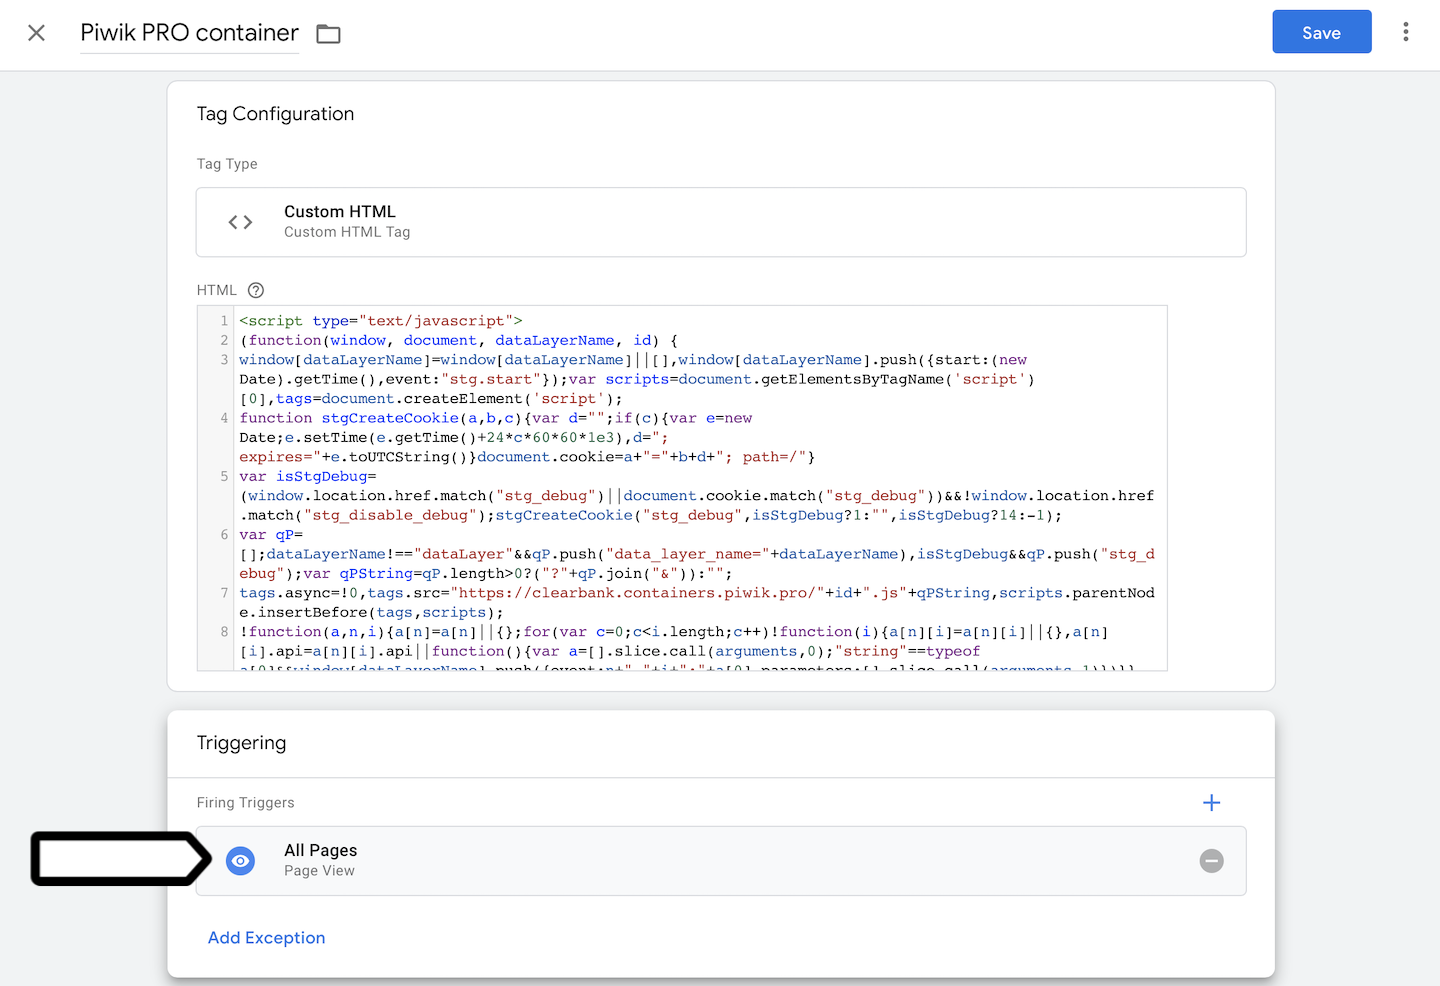 Trigger in Google Tag Manager